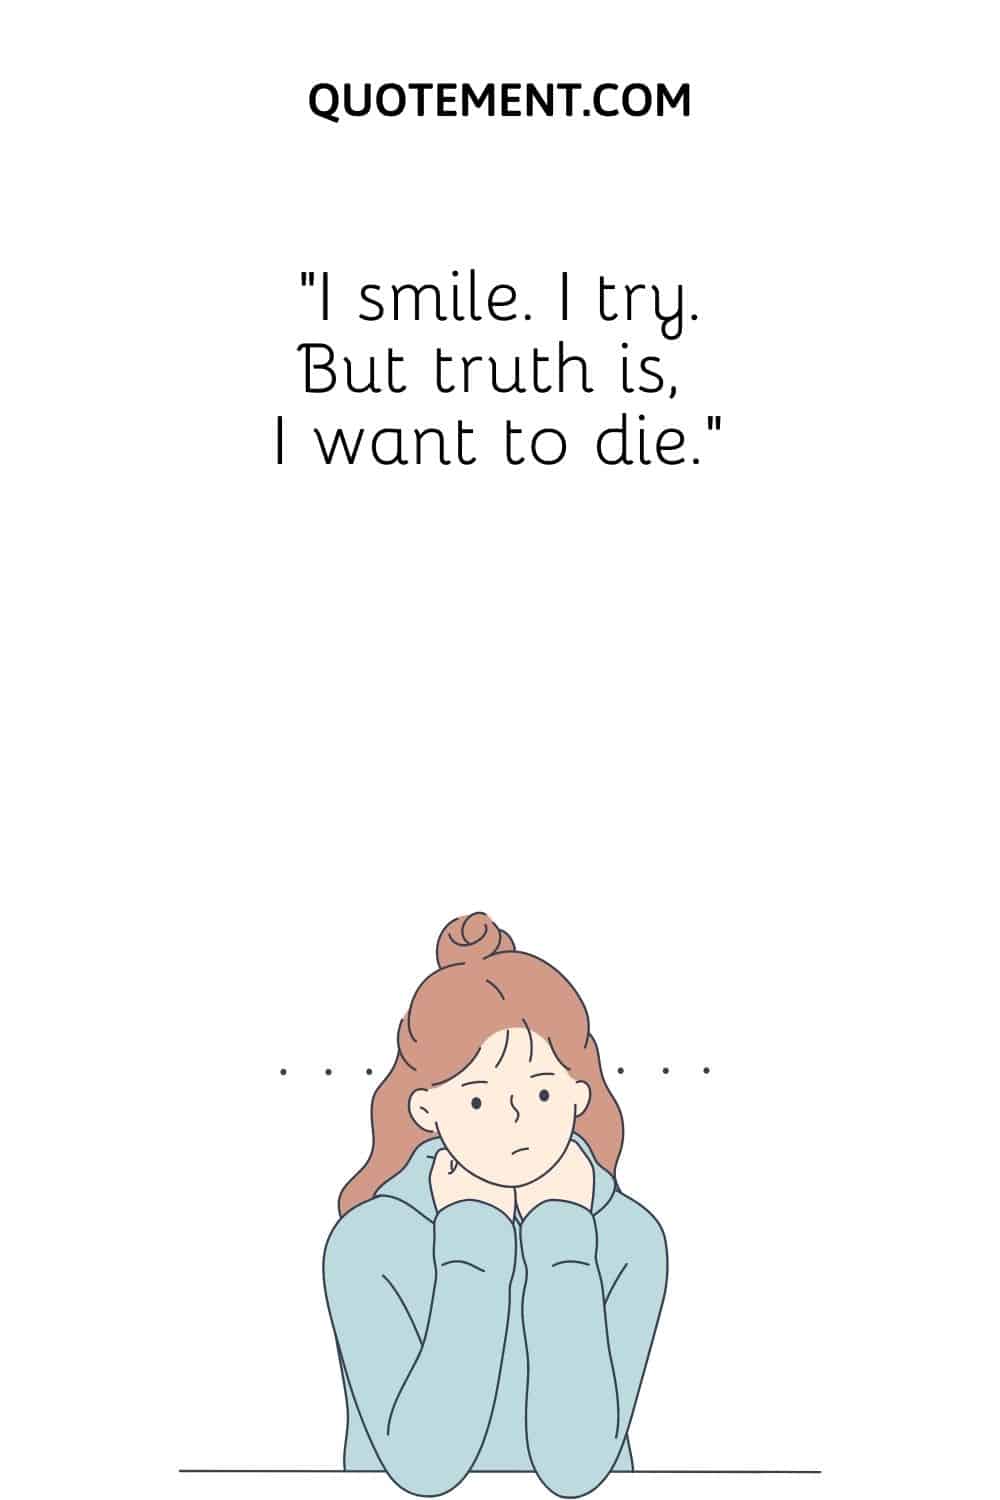 I smile. I try. But truth is, I want to die